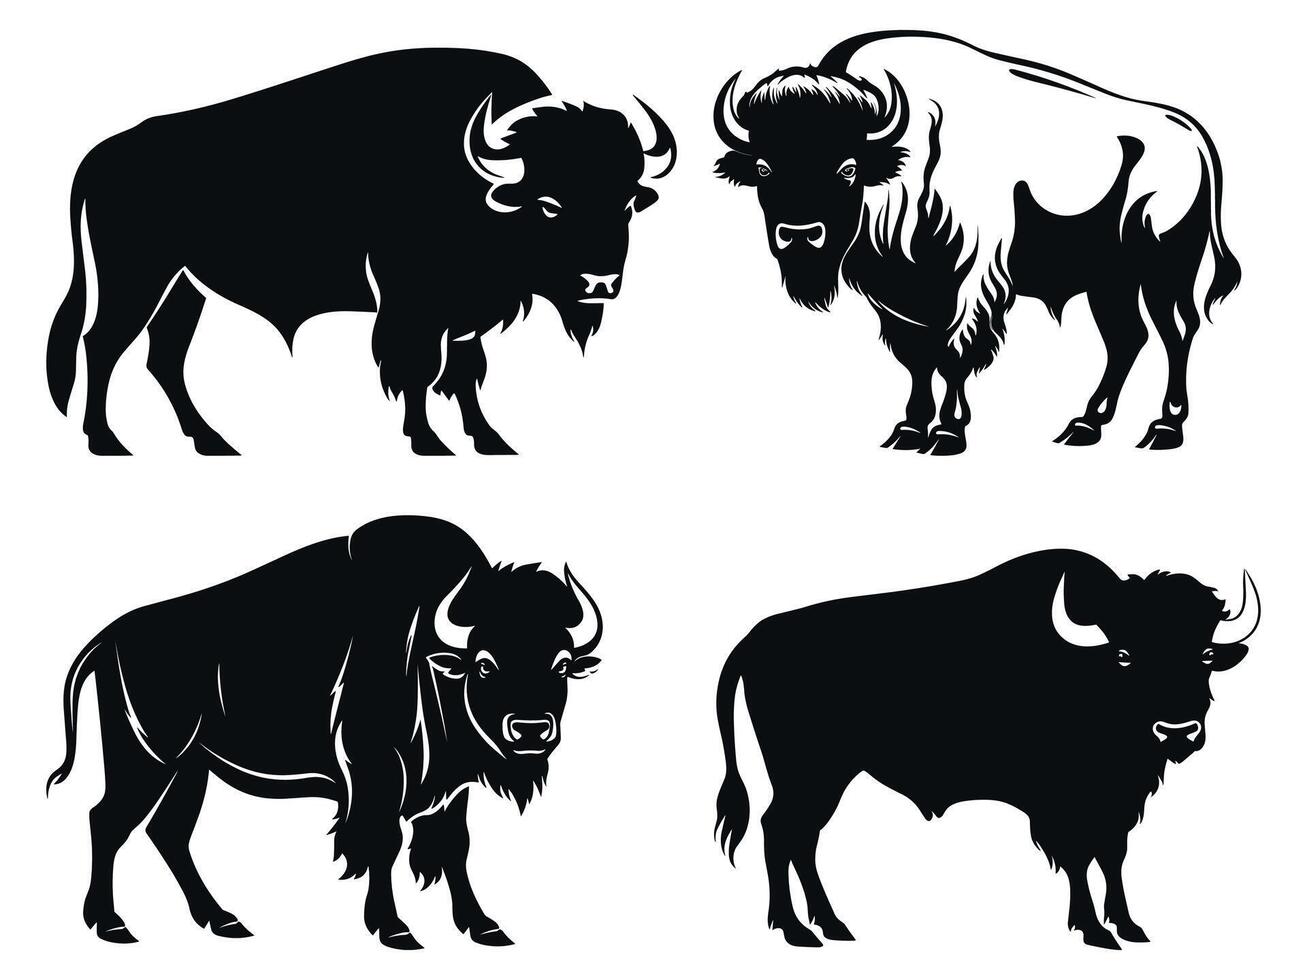 Bison black Silhouette vector, white background. vector